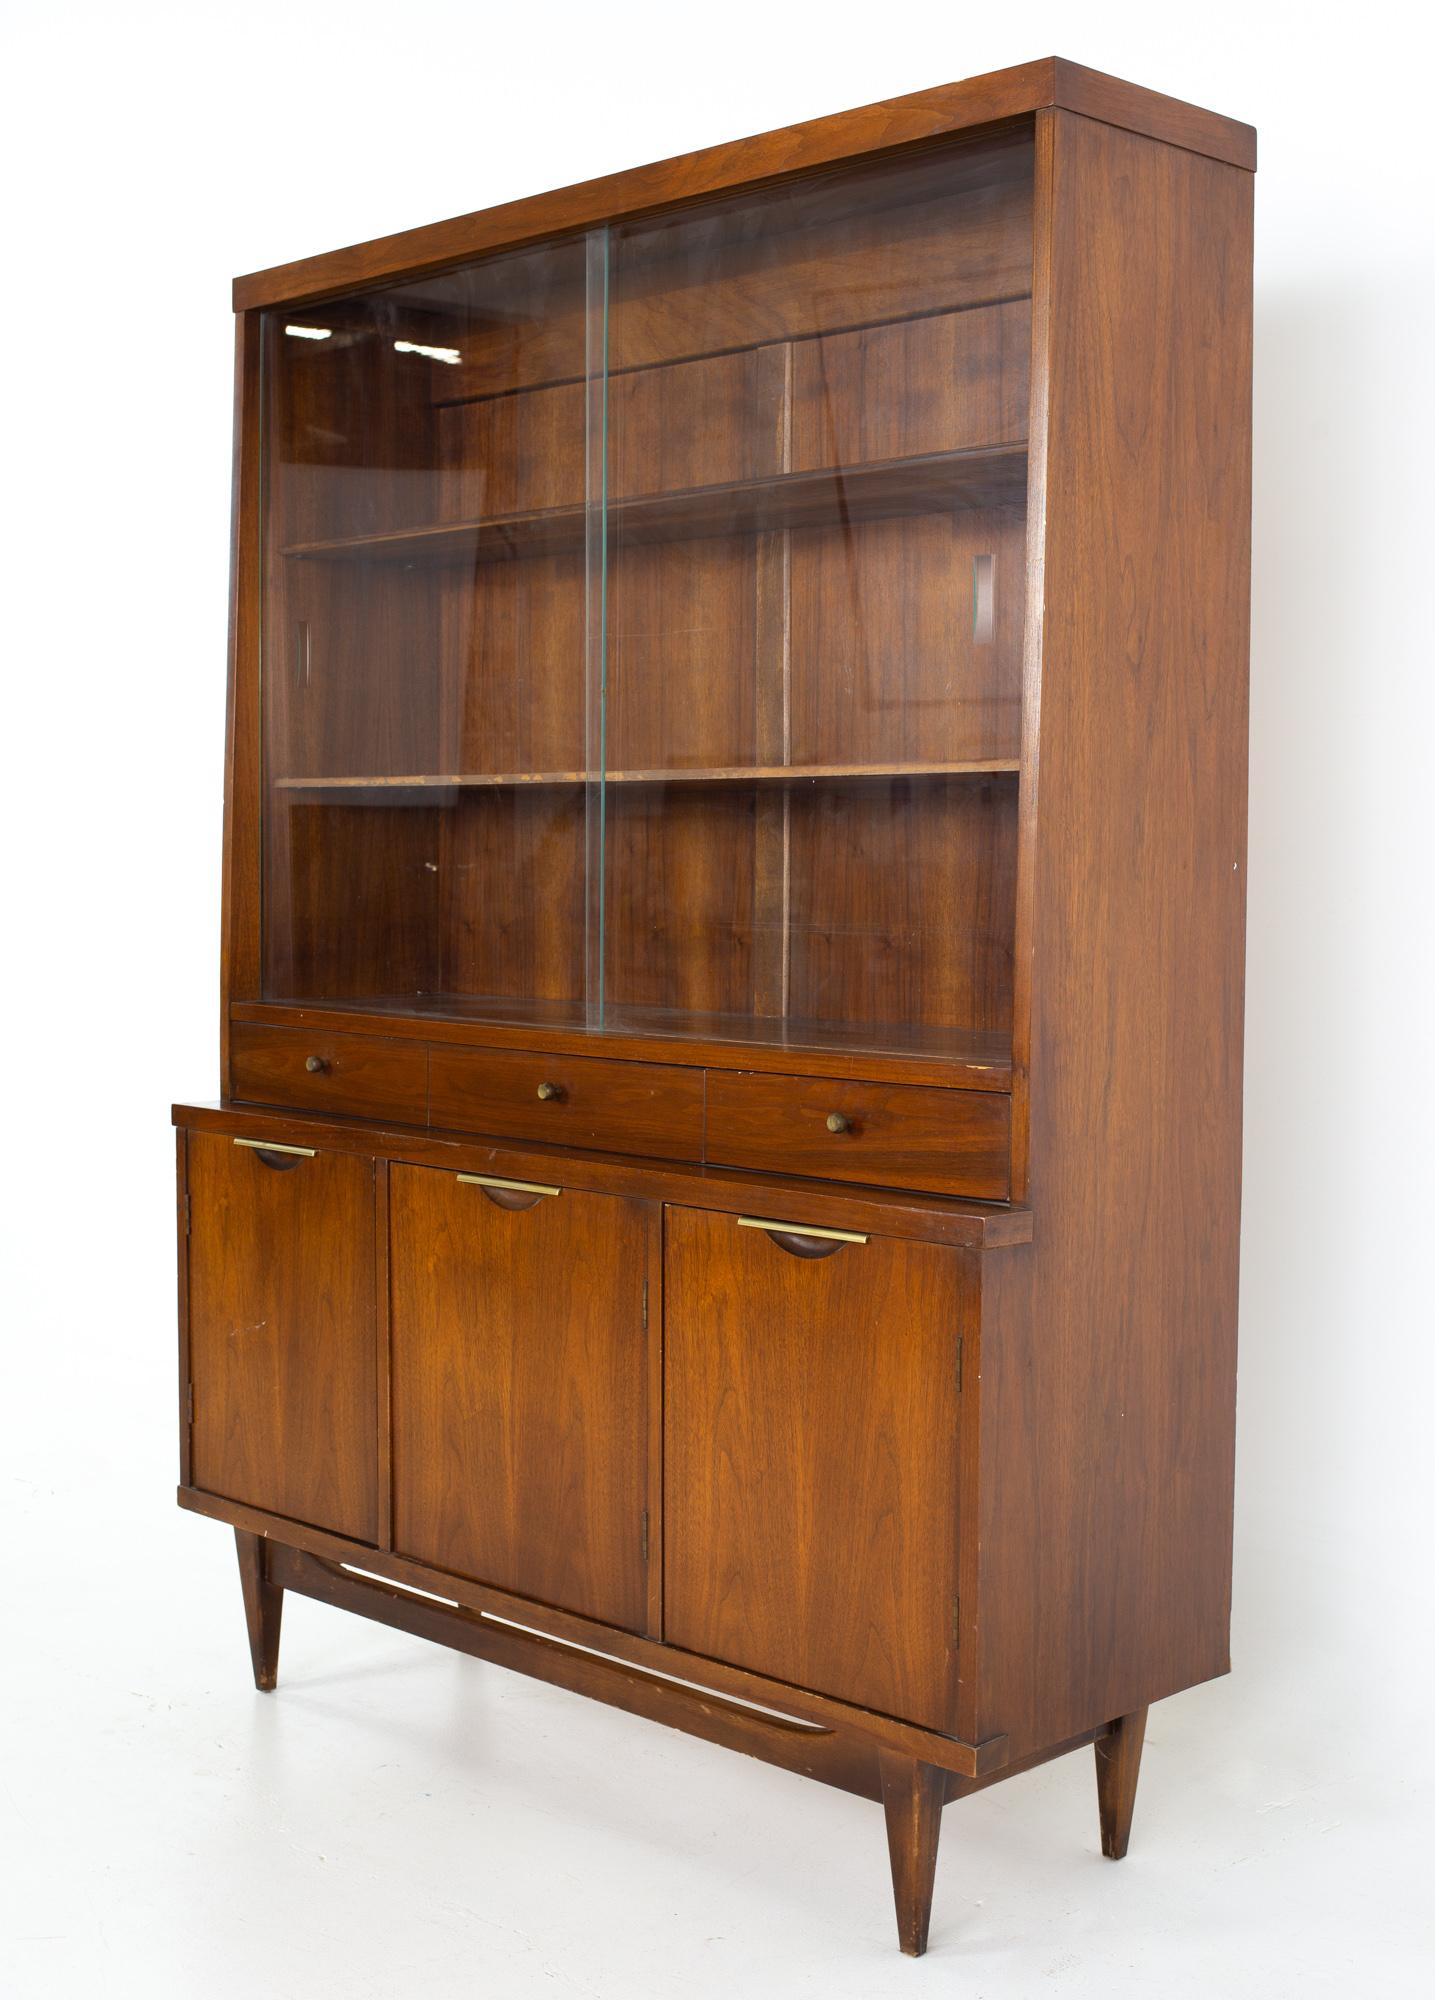 Kent Coffey tableau mid century walnut china cabinet
China cabinet measures: 47.25 wide x 15 deep x 64.25 inches high

All pieces of furniture can be had in what we call restored vintage condition. That means the piece is restored upon purchase